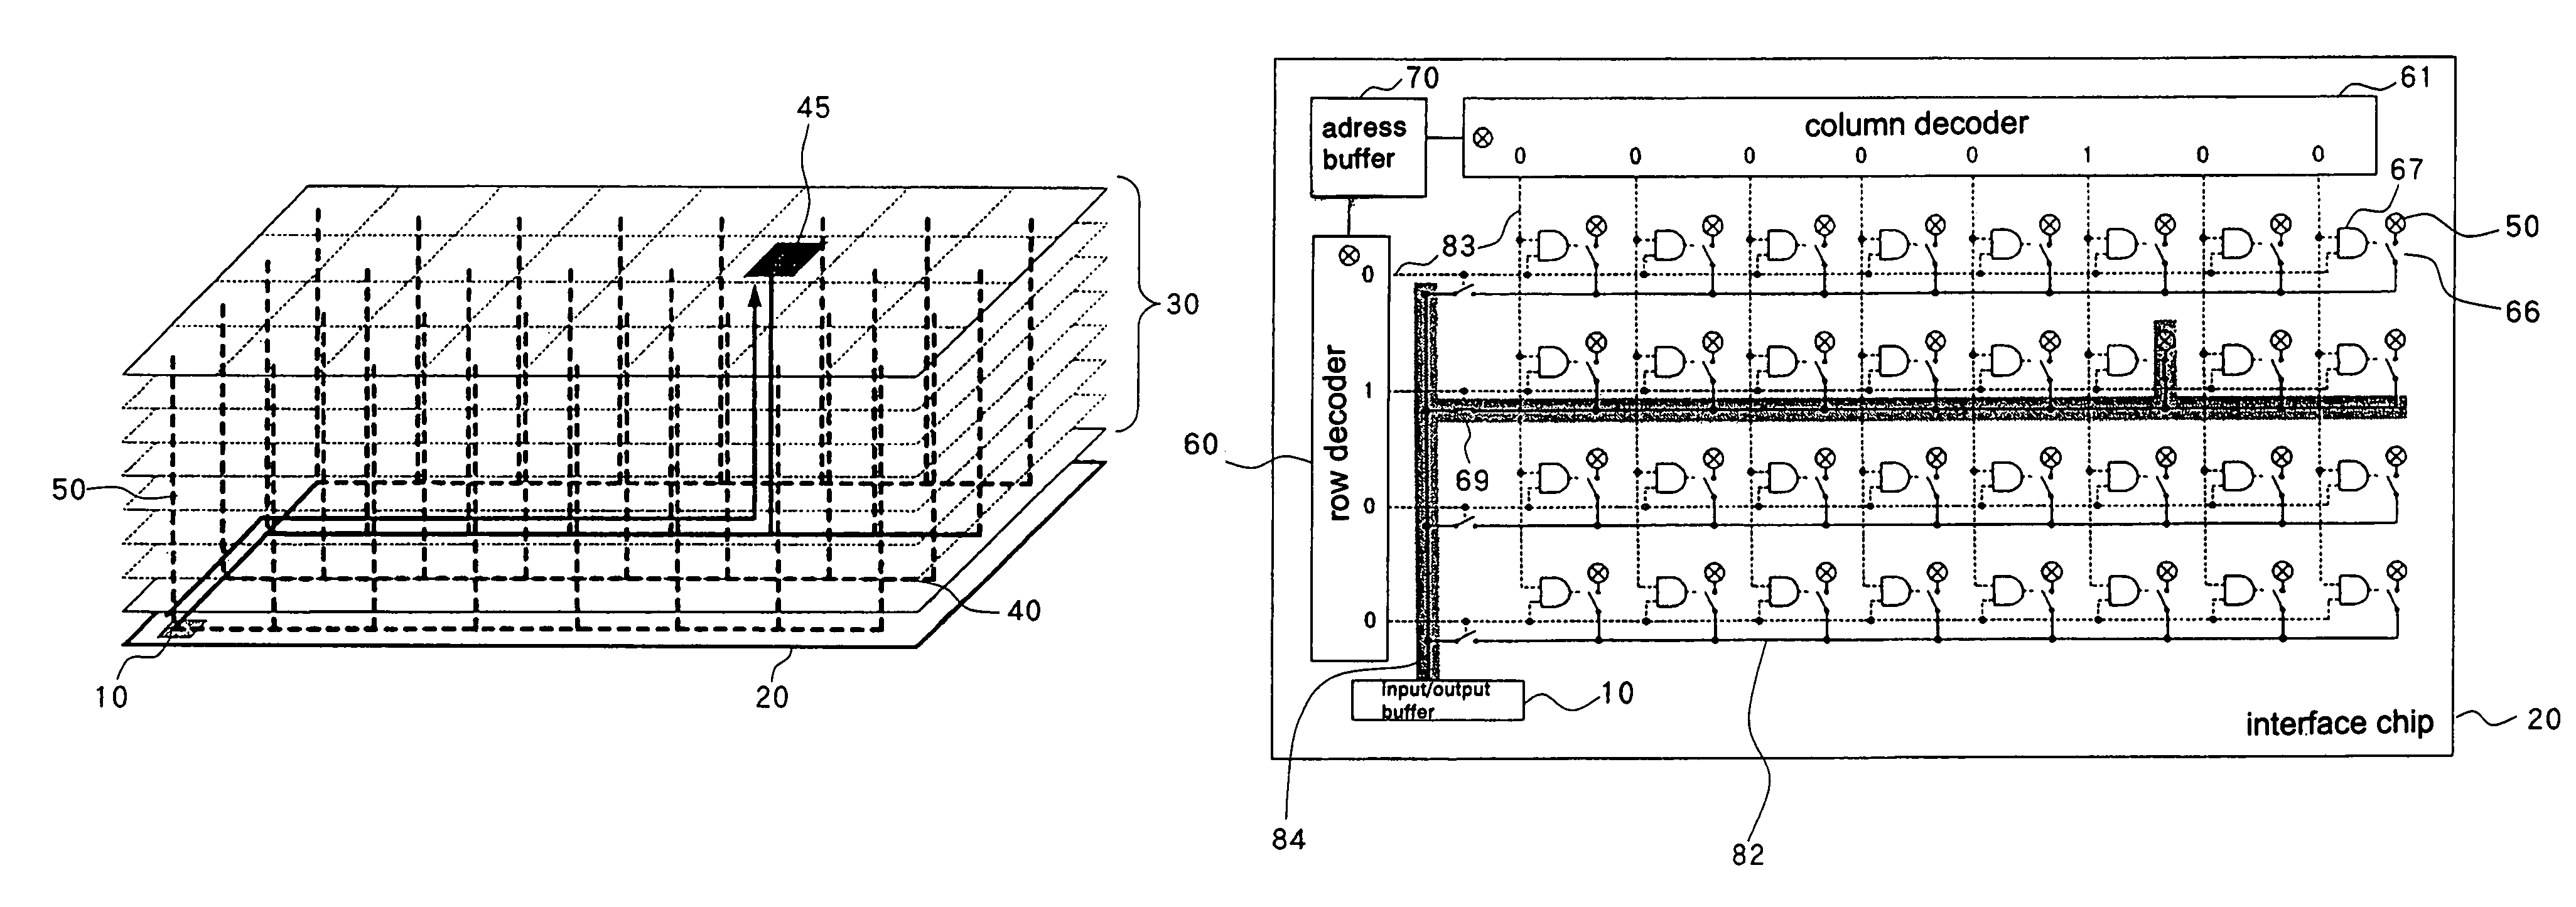 Three-dimensional semiconductor device provided with interchip interconnection selection means for electrically isolating interconnections other than selected interchip interconnections